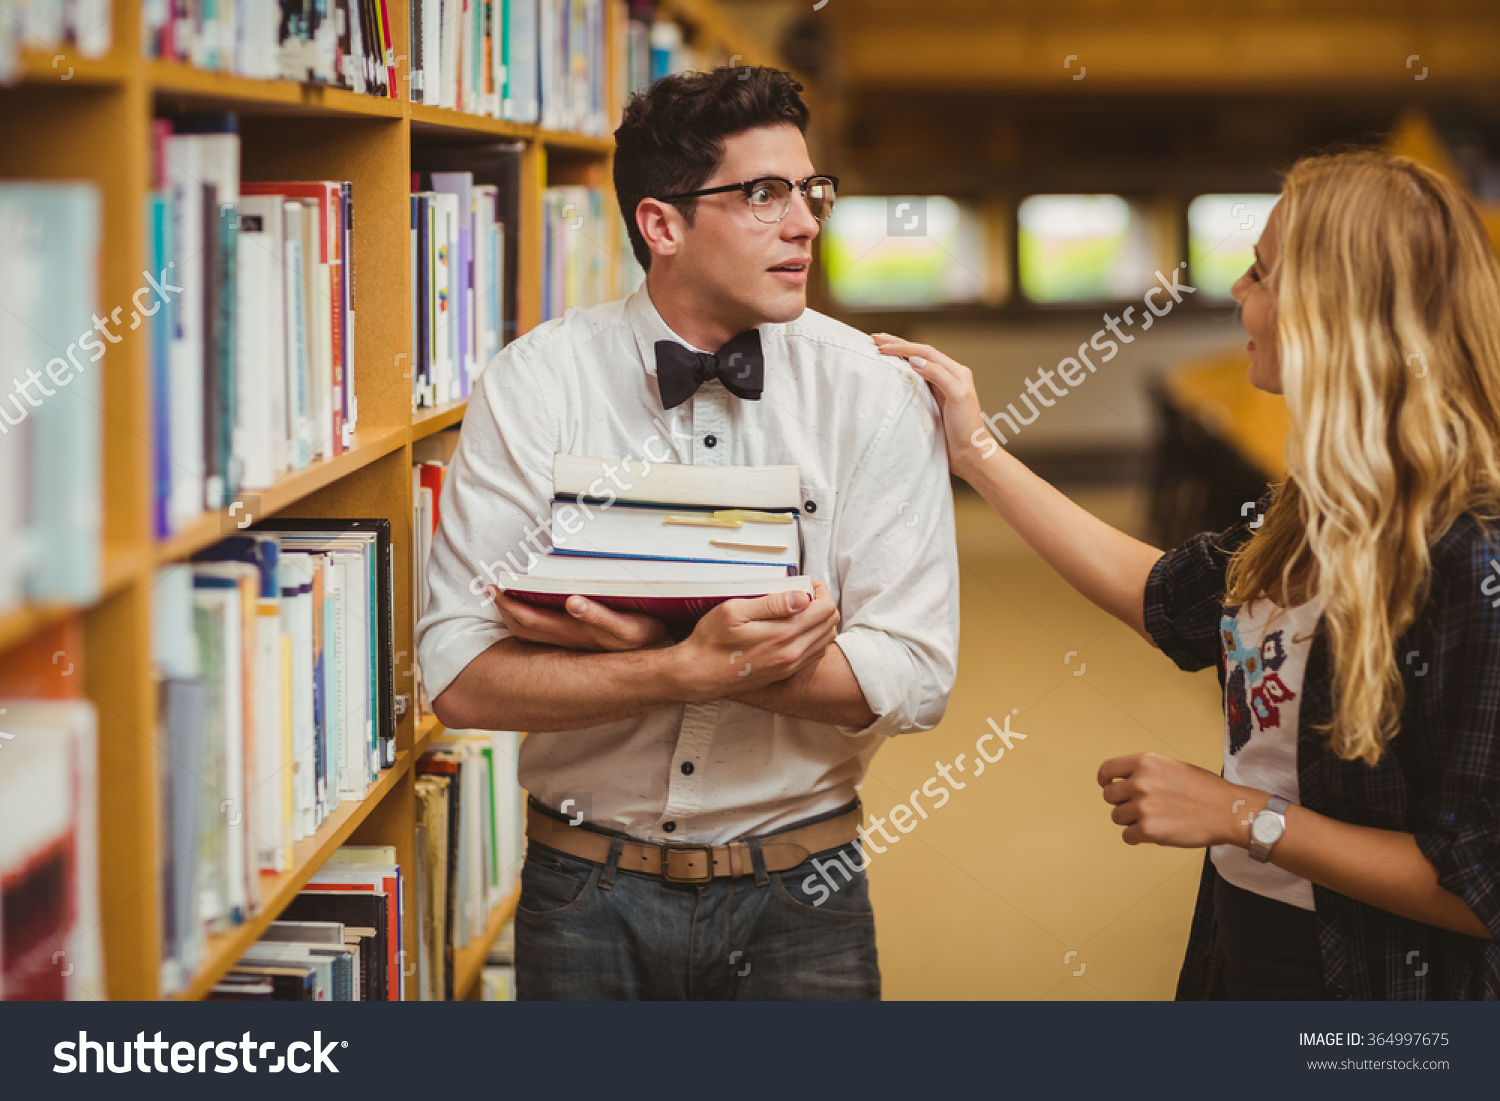 stock-photo-embarrassed-nerd-meeting-up-a-girl-in-library-364997675